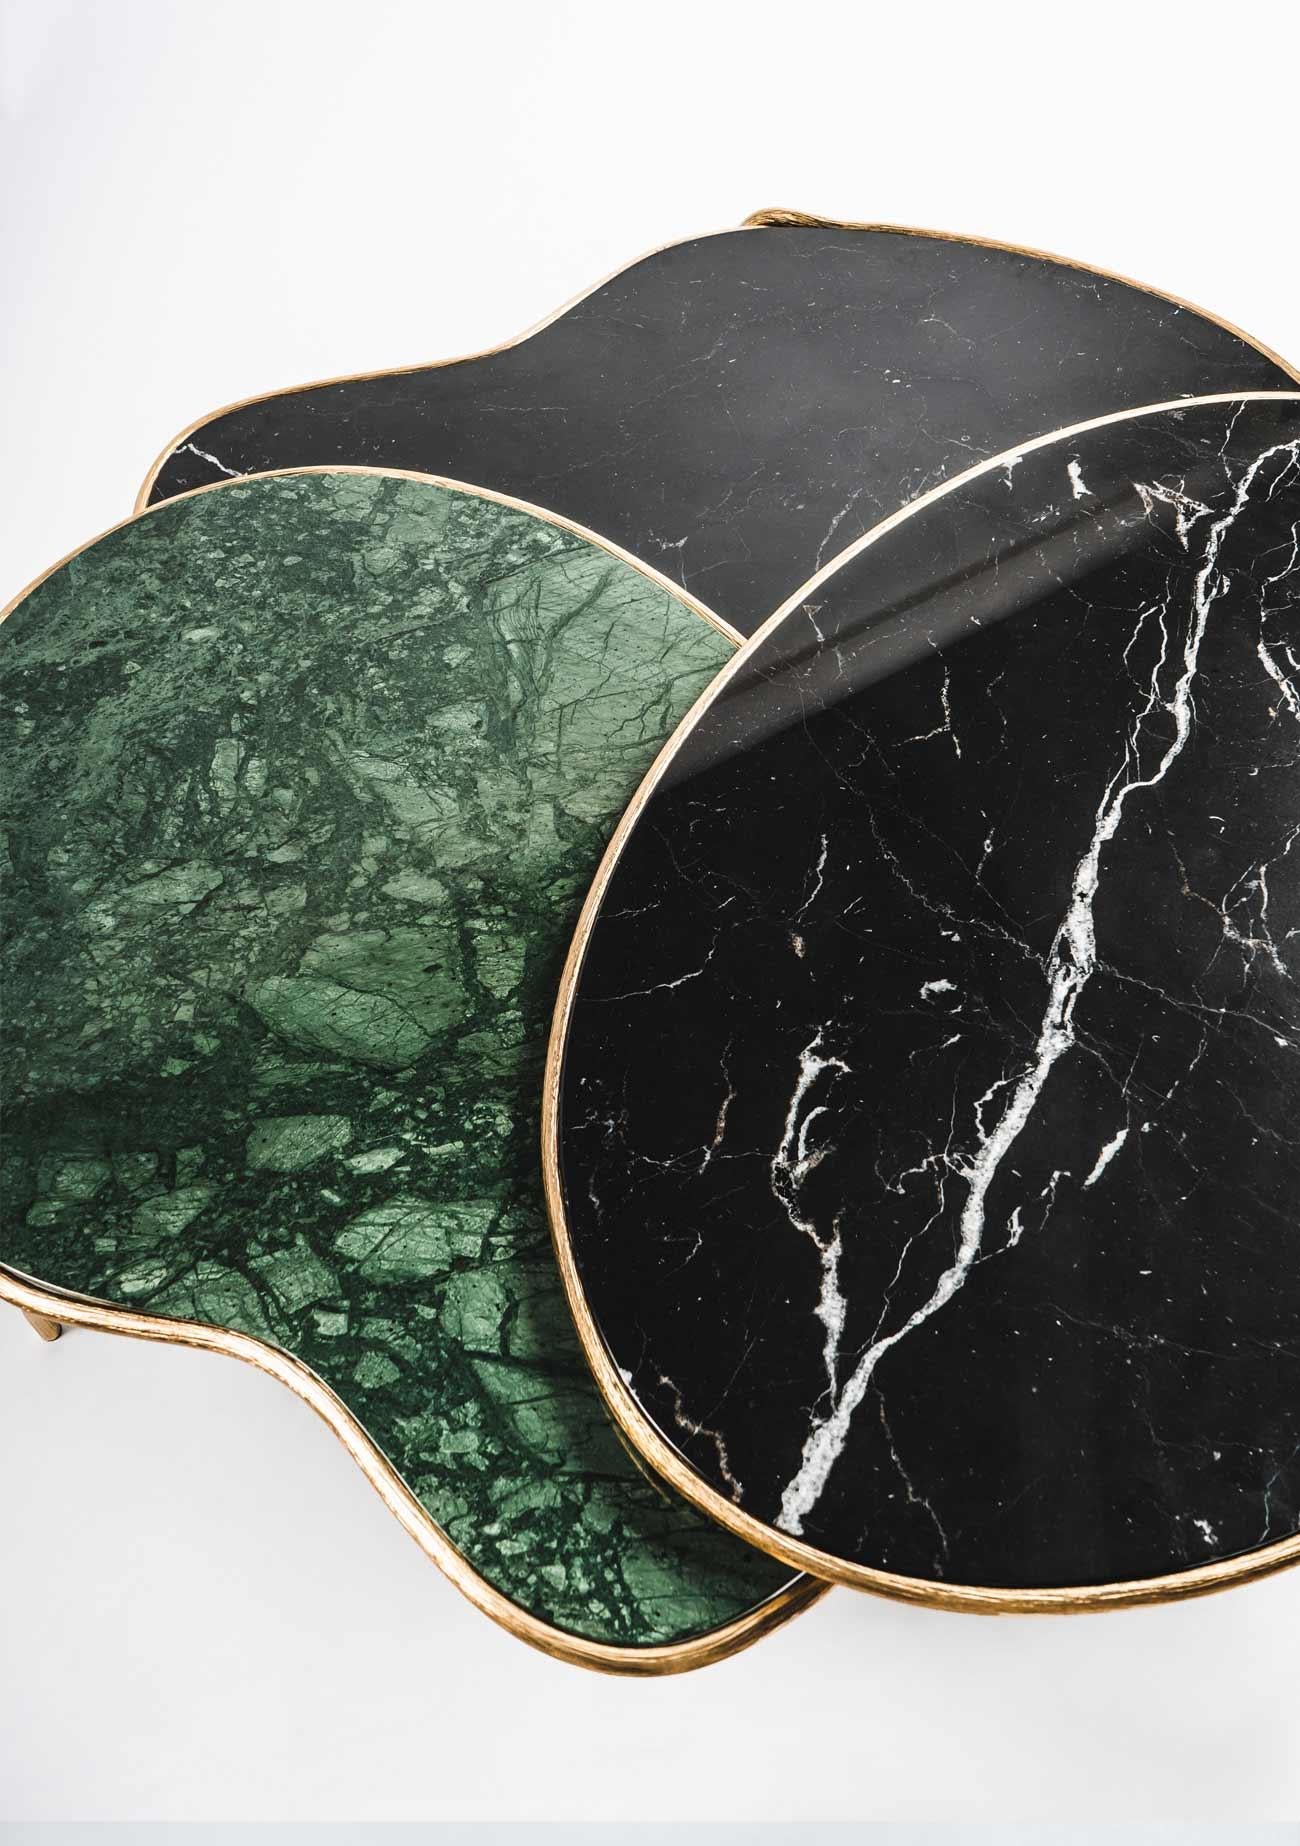 Minerva, the name of the Roman goddess of arts and craftsmen, patroness of manual work that inspires our professionals towards aesthetics and perfection. This three-plane table is composed of three marbles, two Marquina Black and one Guatemala